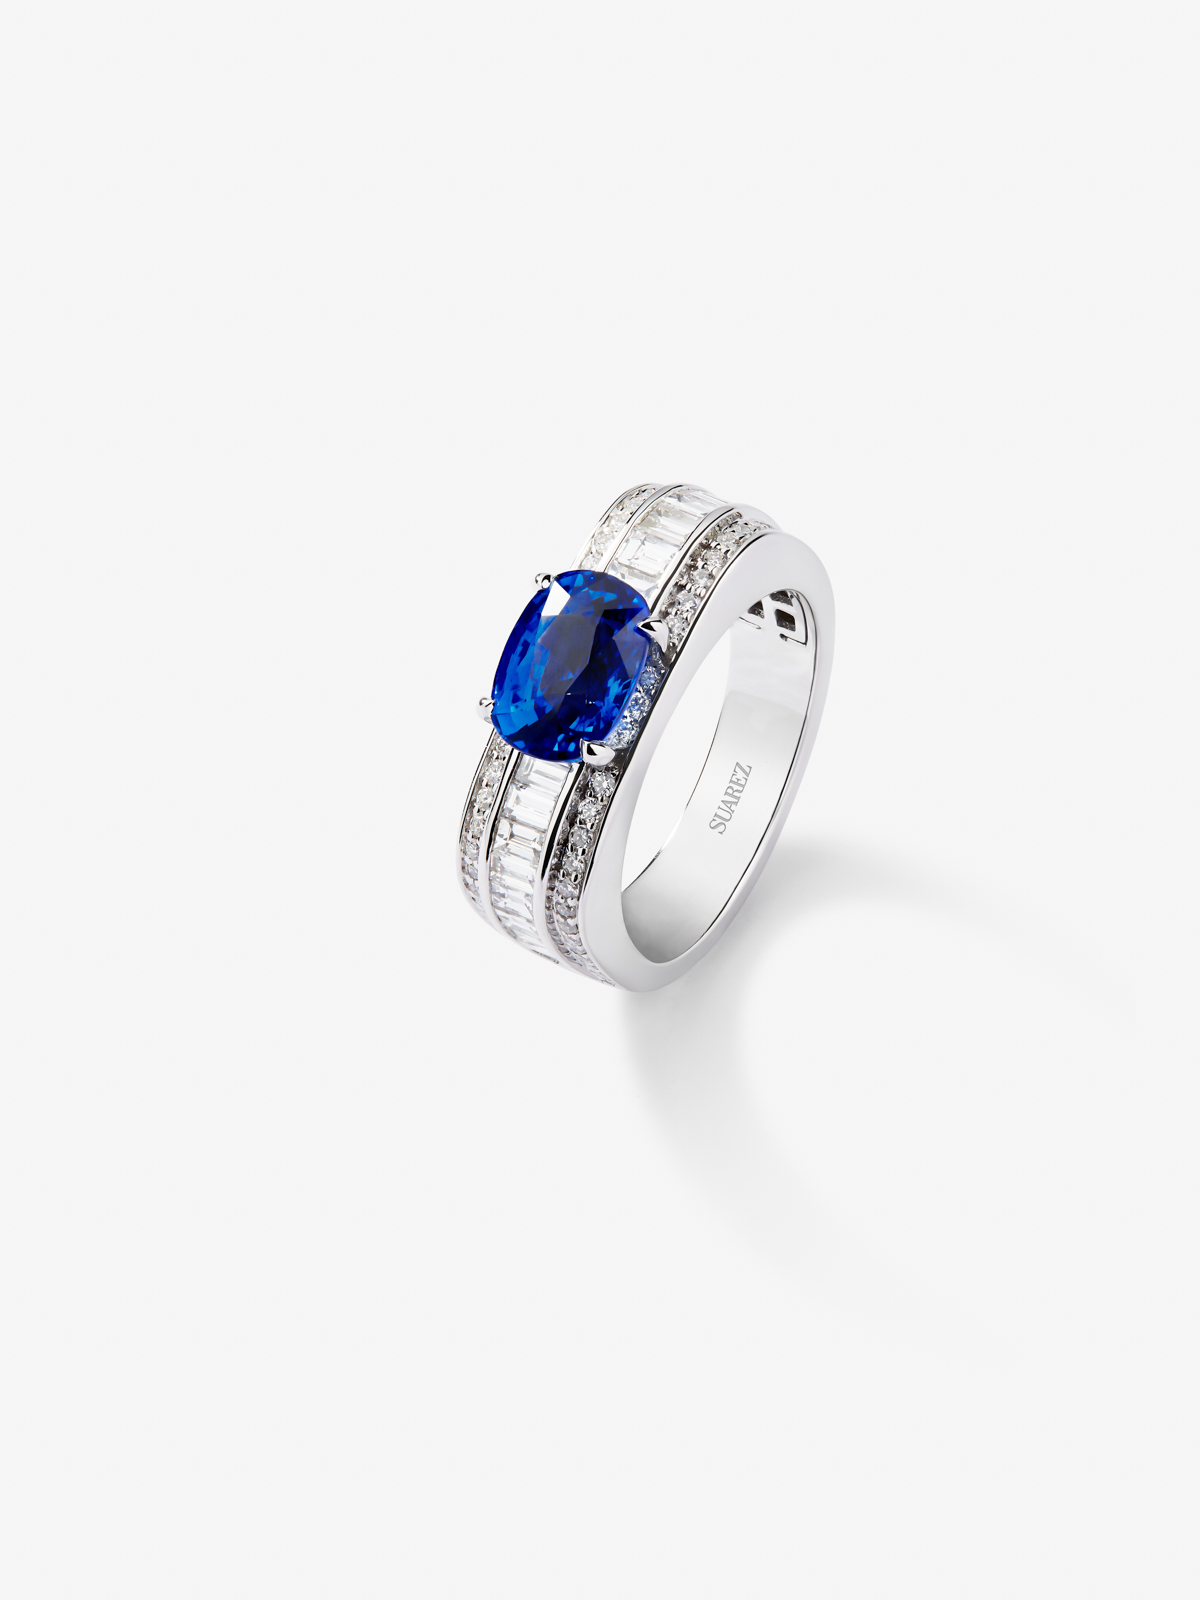 18K White Gold Ring with Royal Blue Sapp